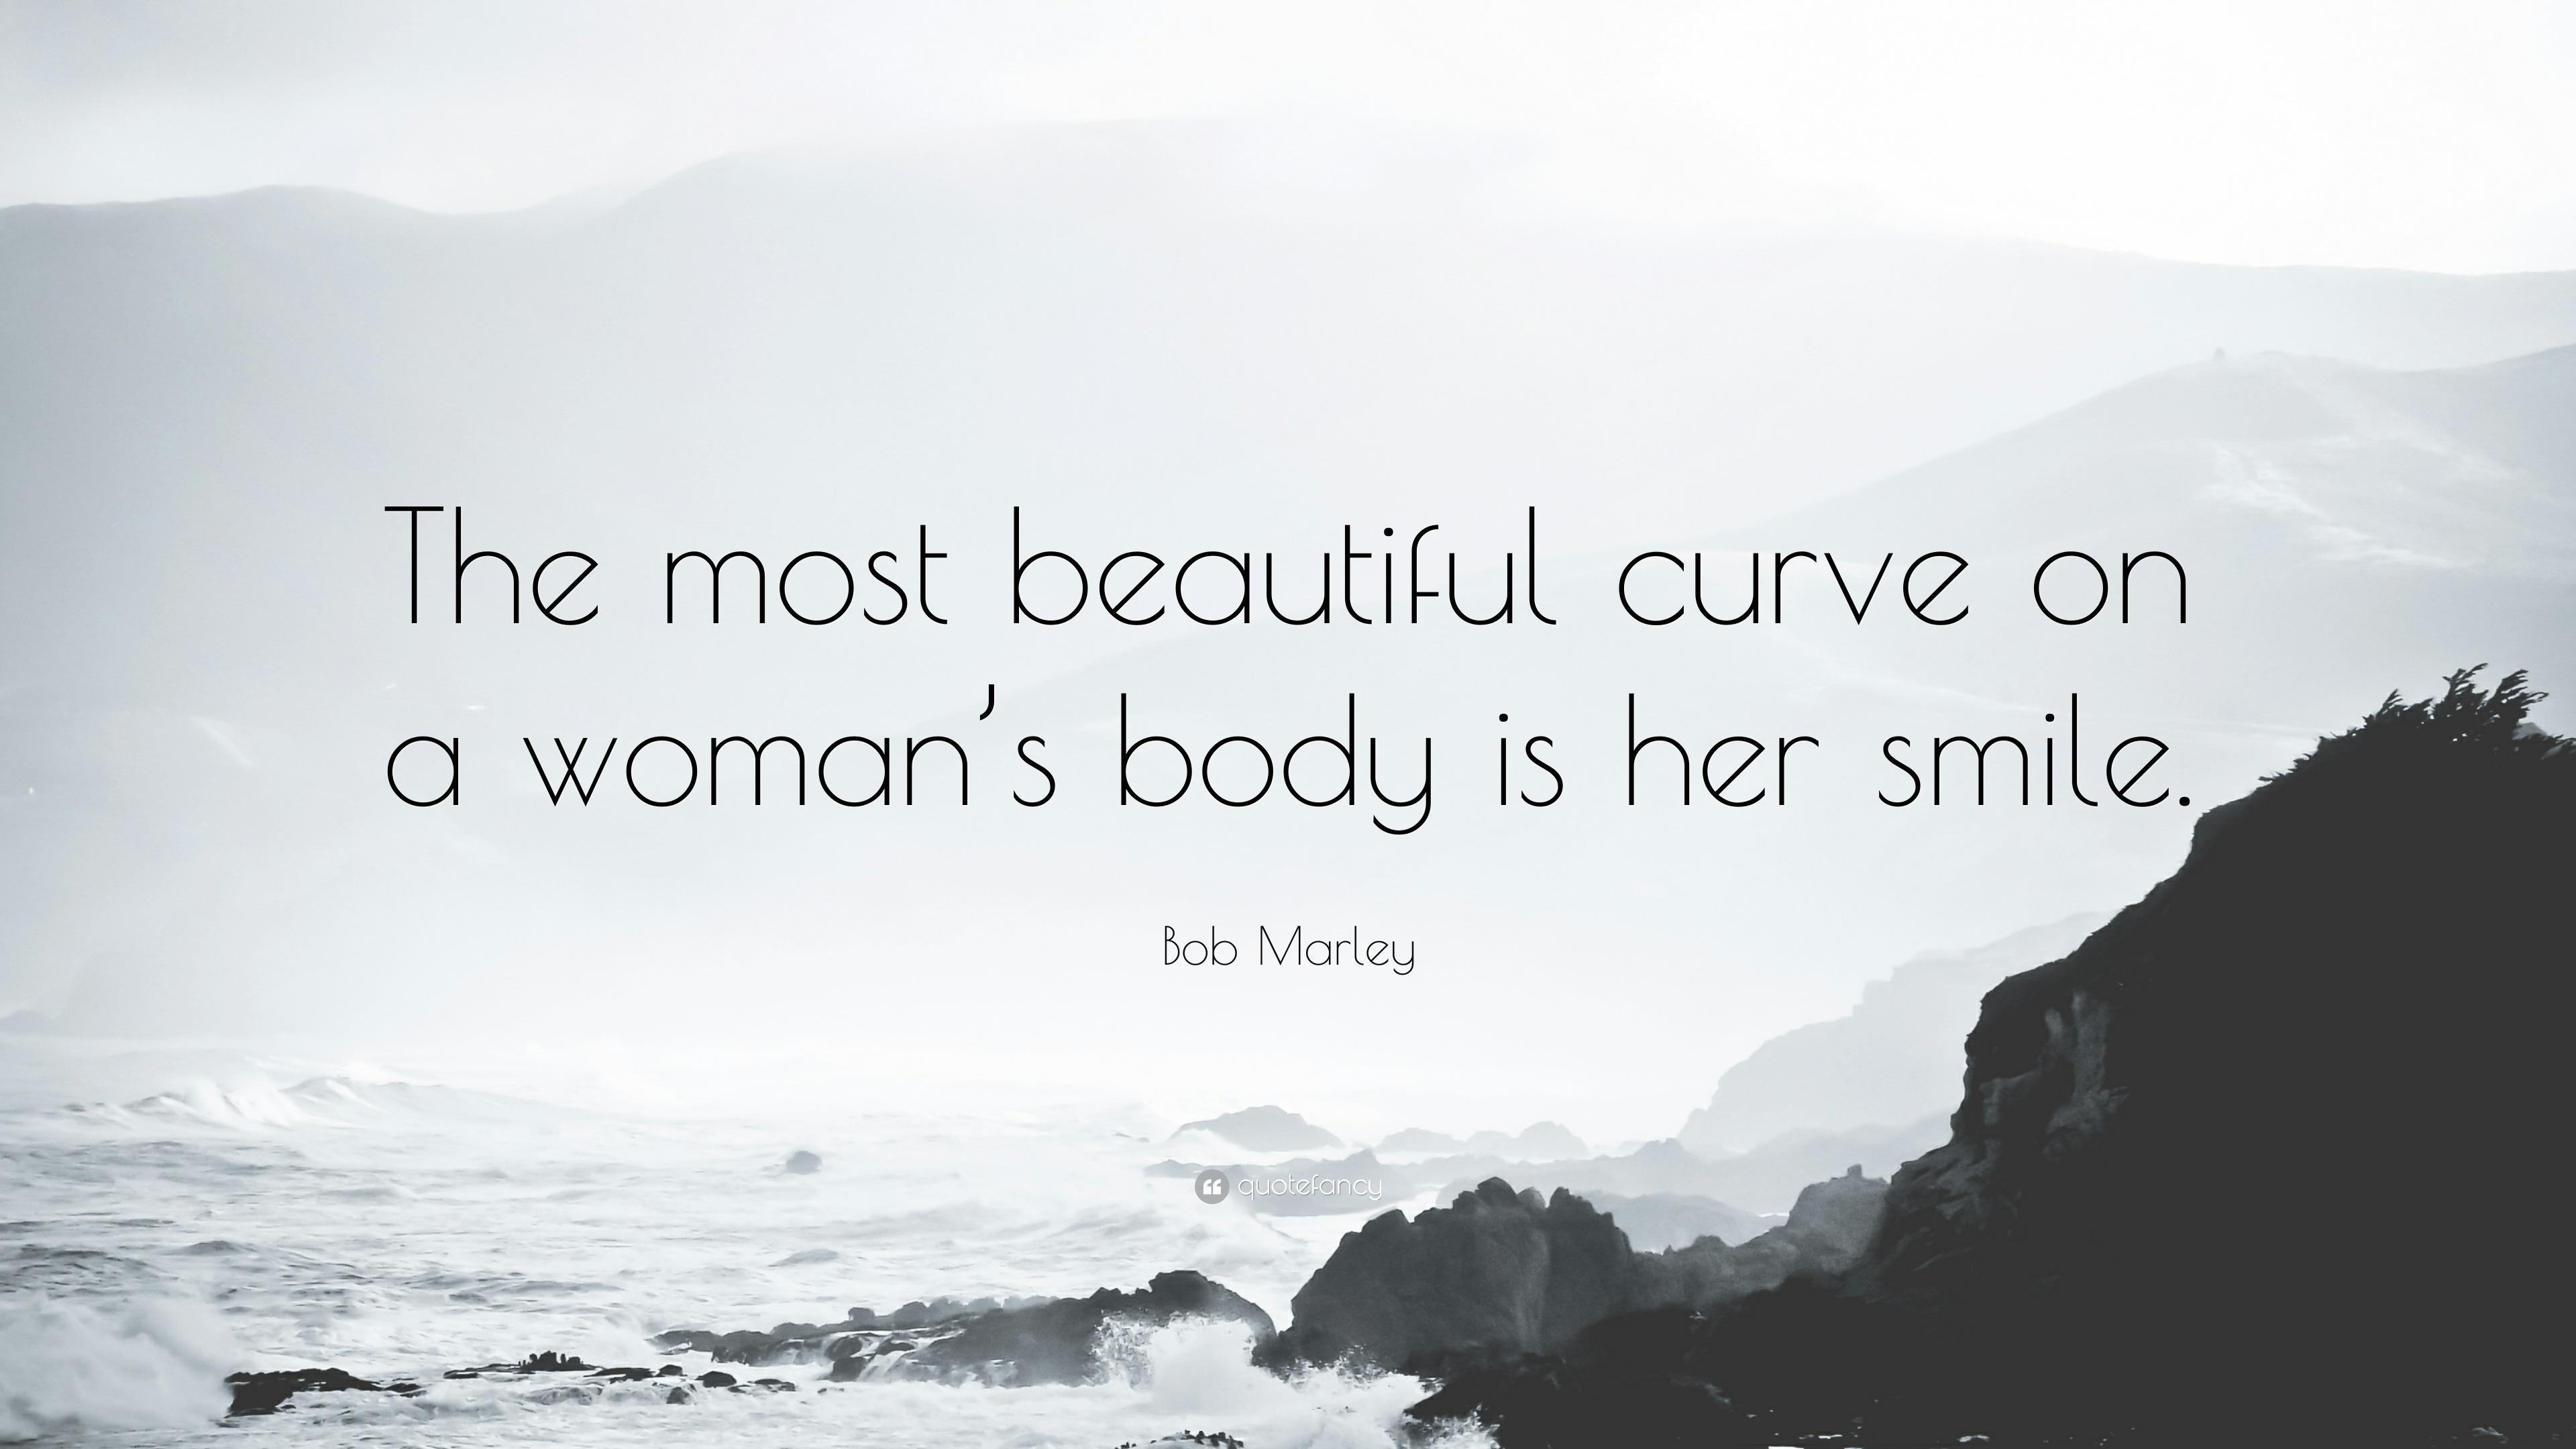 The most beautiful curve on a woman's body is her smile.” – Bob